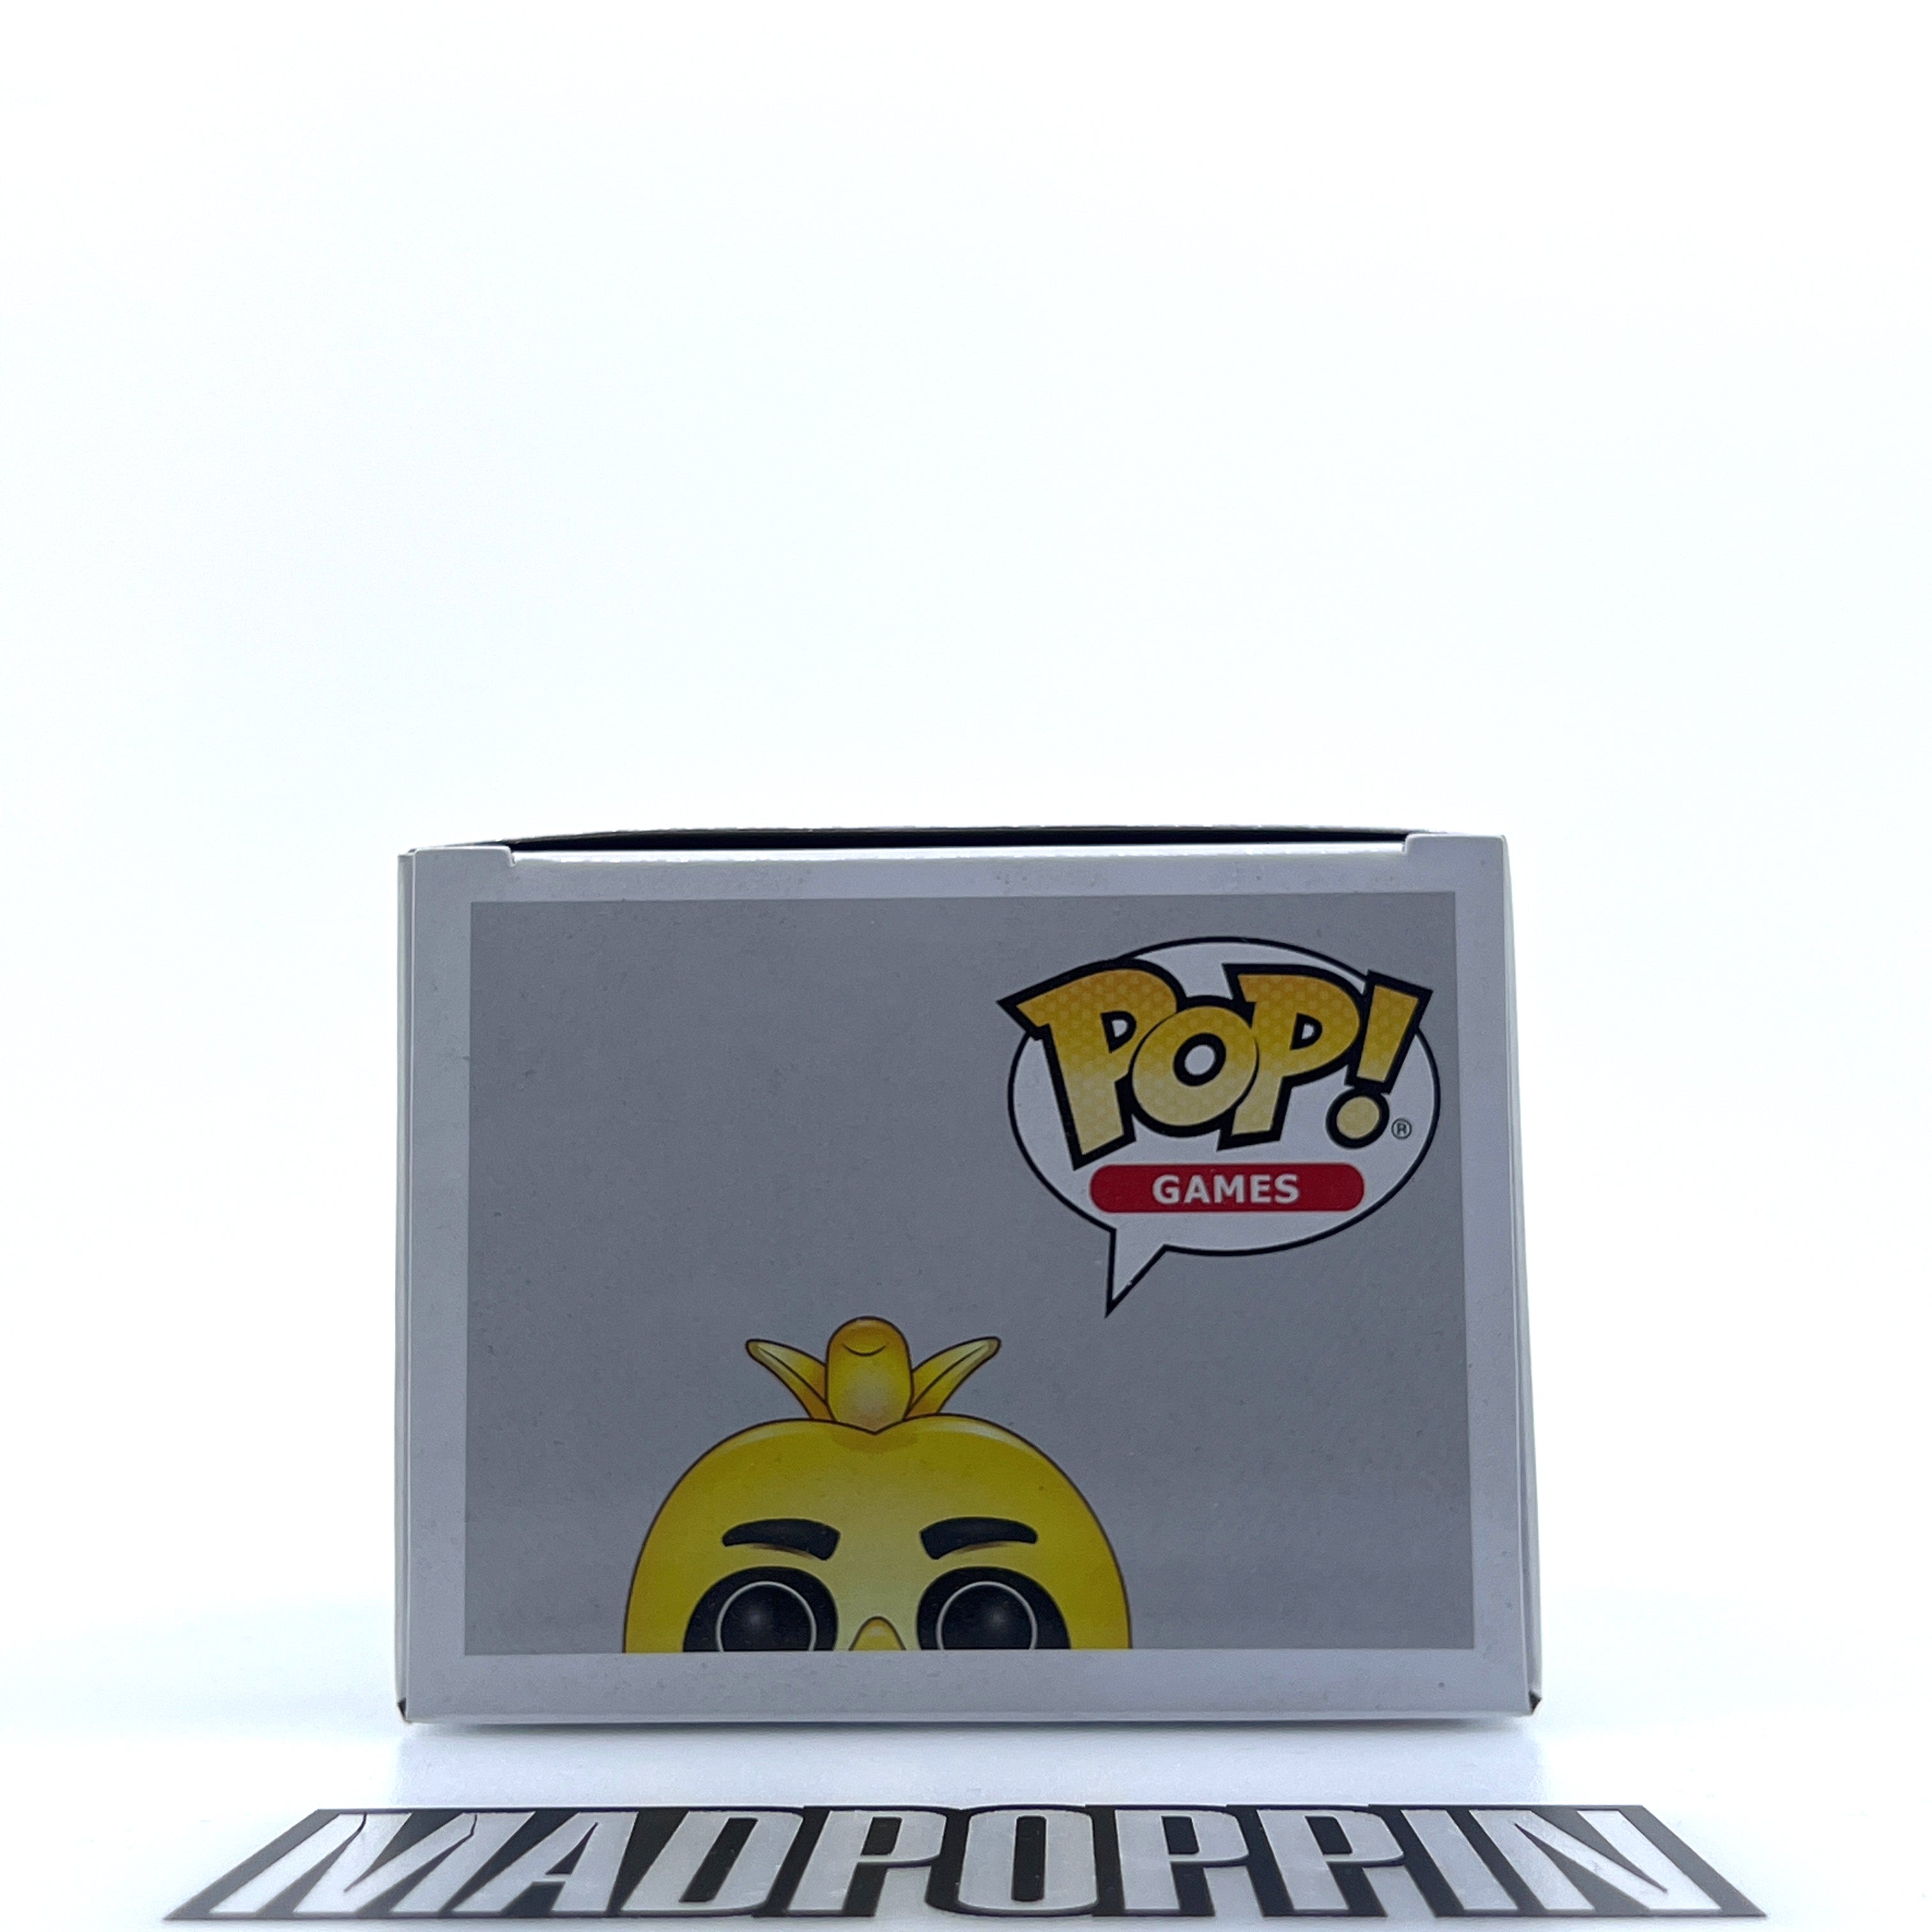 Funko Pop Games Five Nights at Freddy's Chica Vaulted 108